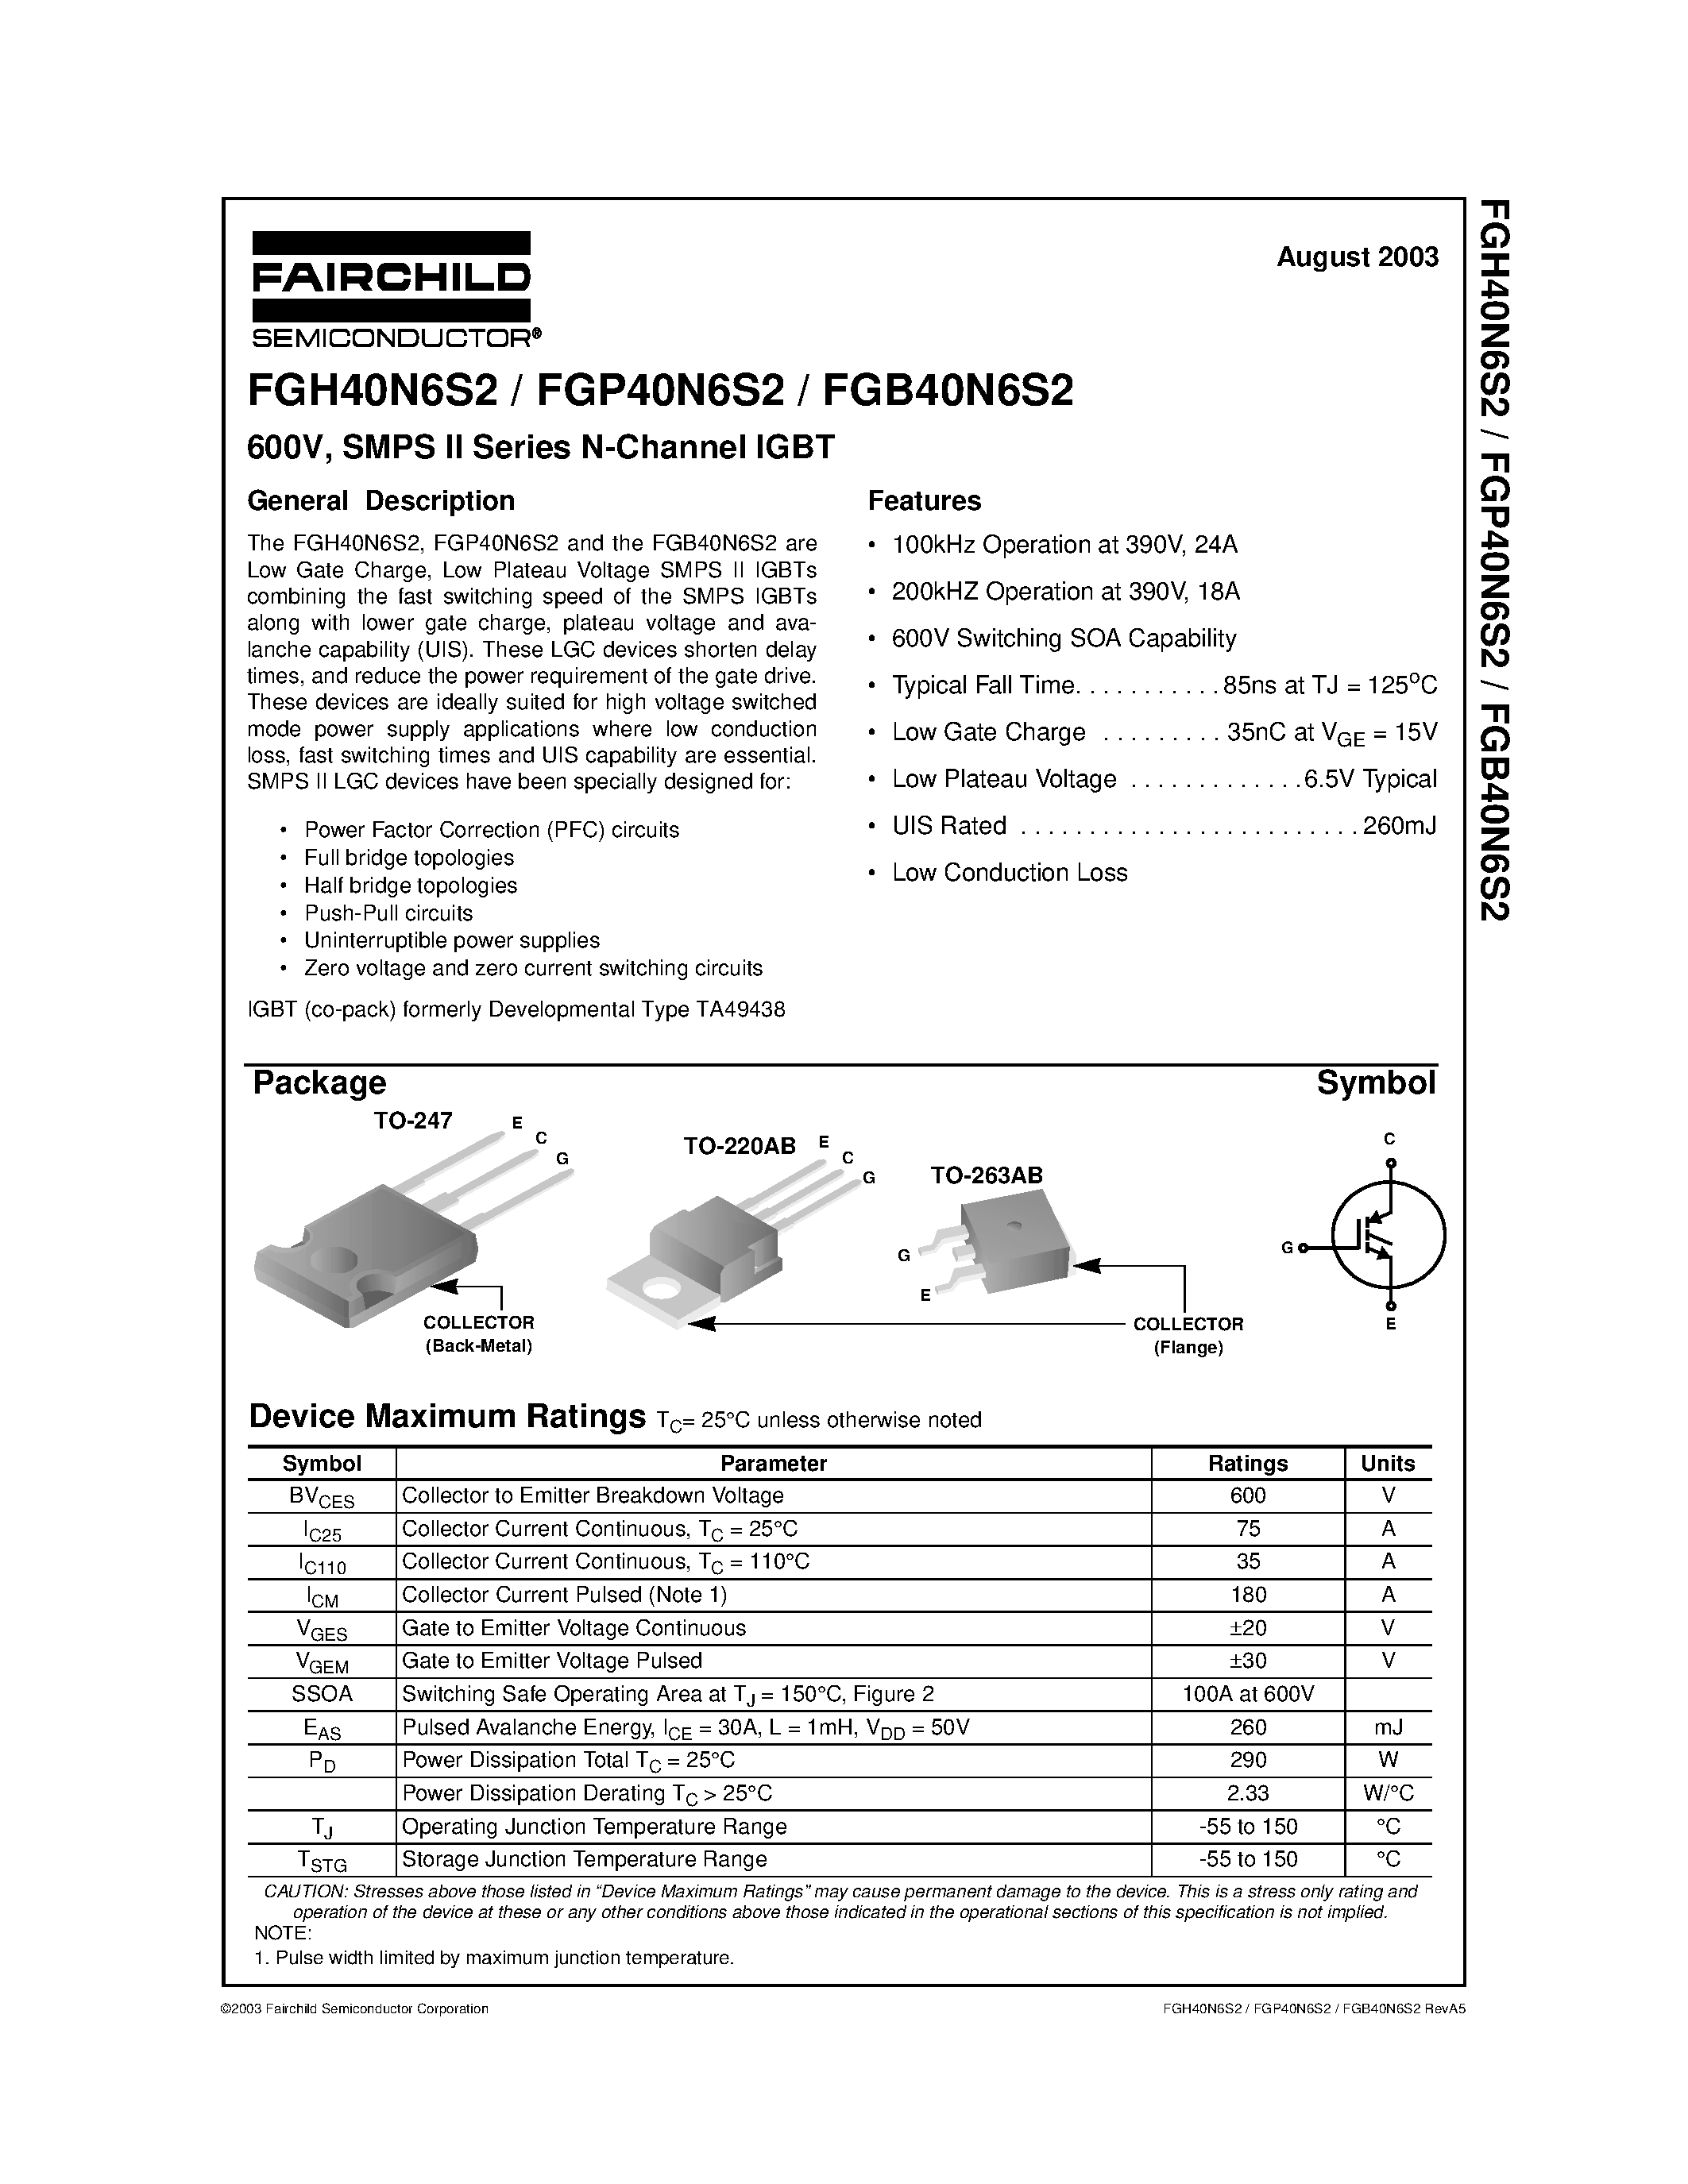 Datasheet FGB40N6S2 - 600V/ SMPS II Series N-Channel IGBT page 1